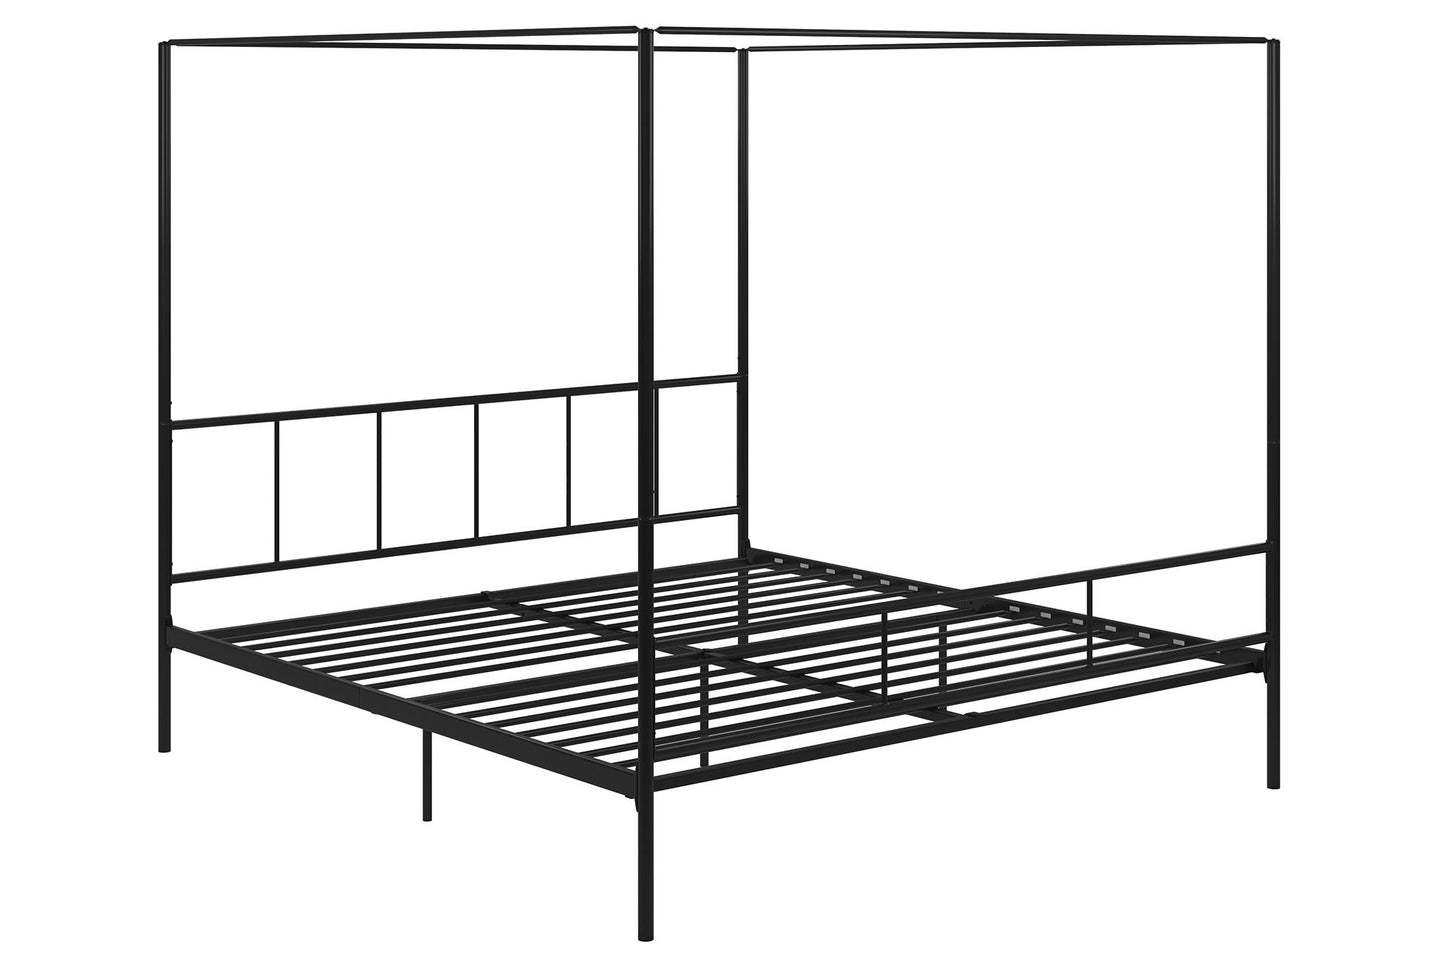 Marion Canopy Bed - Black - King